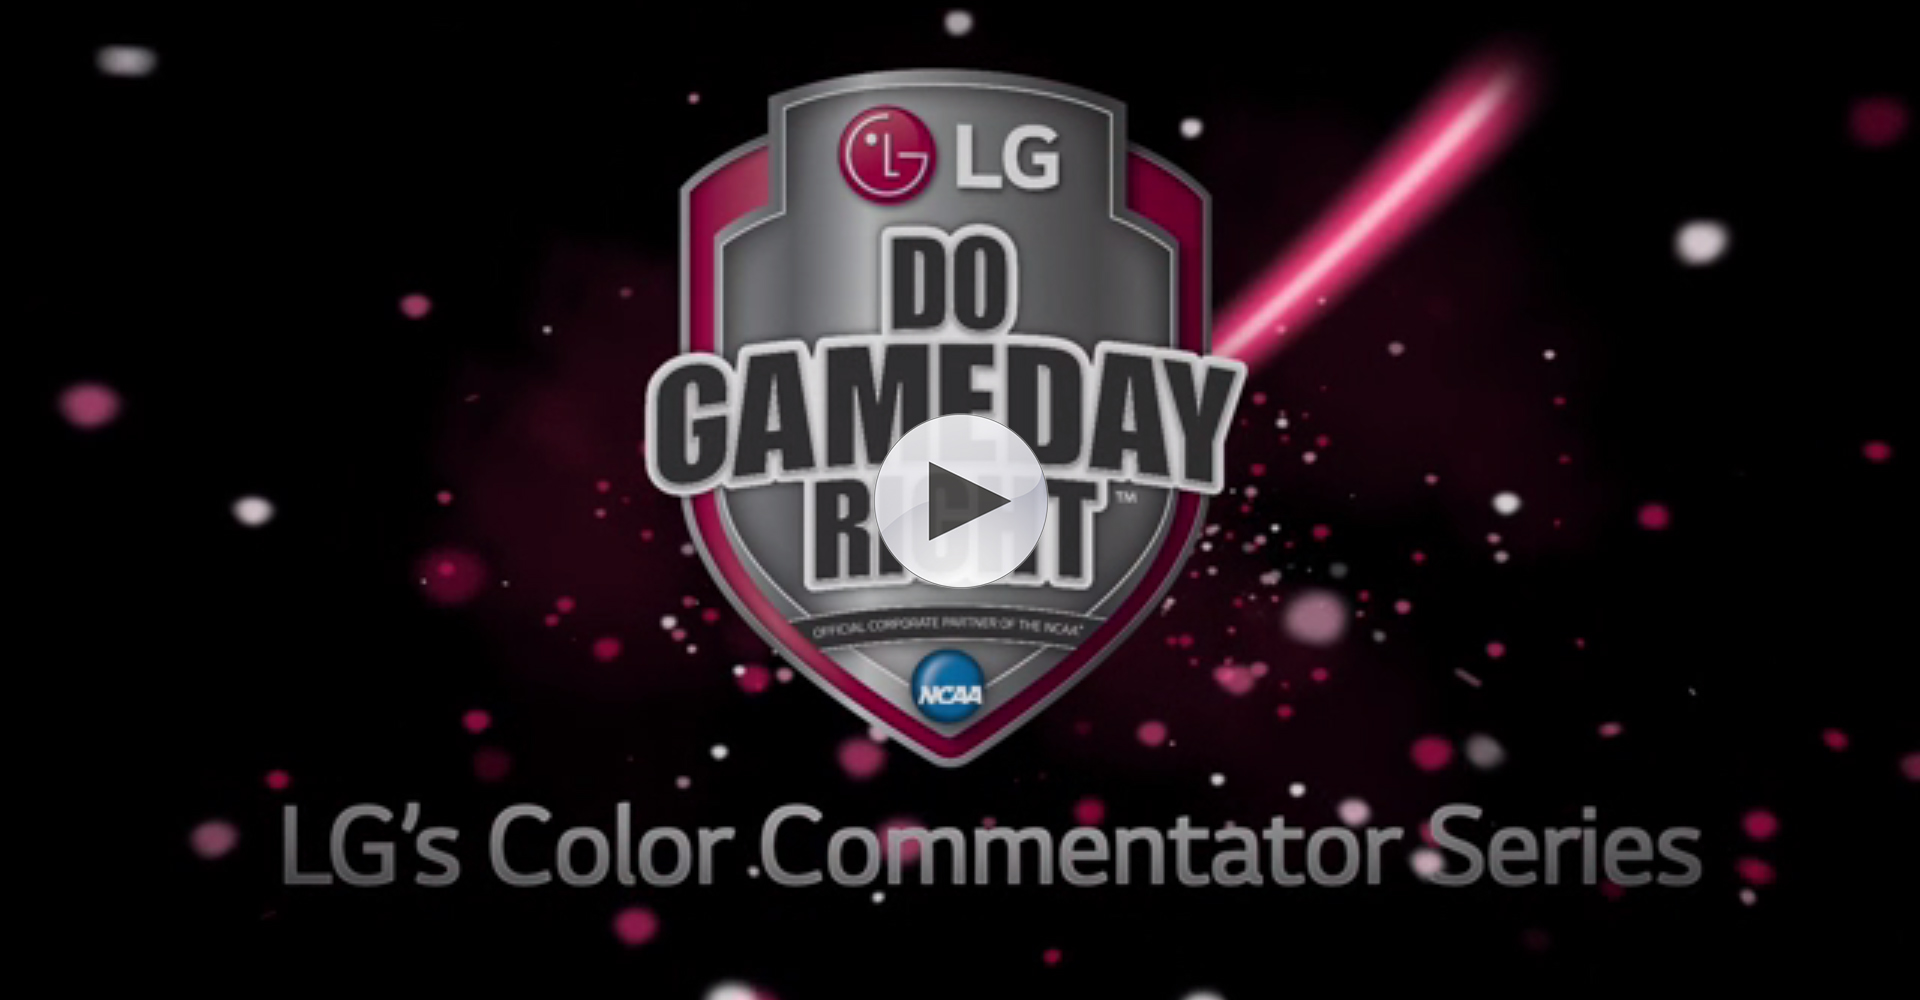 ESPN College Basketball Analyst and LG Color Commentator Jay Bilas shares his tips on how to do game day right.